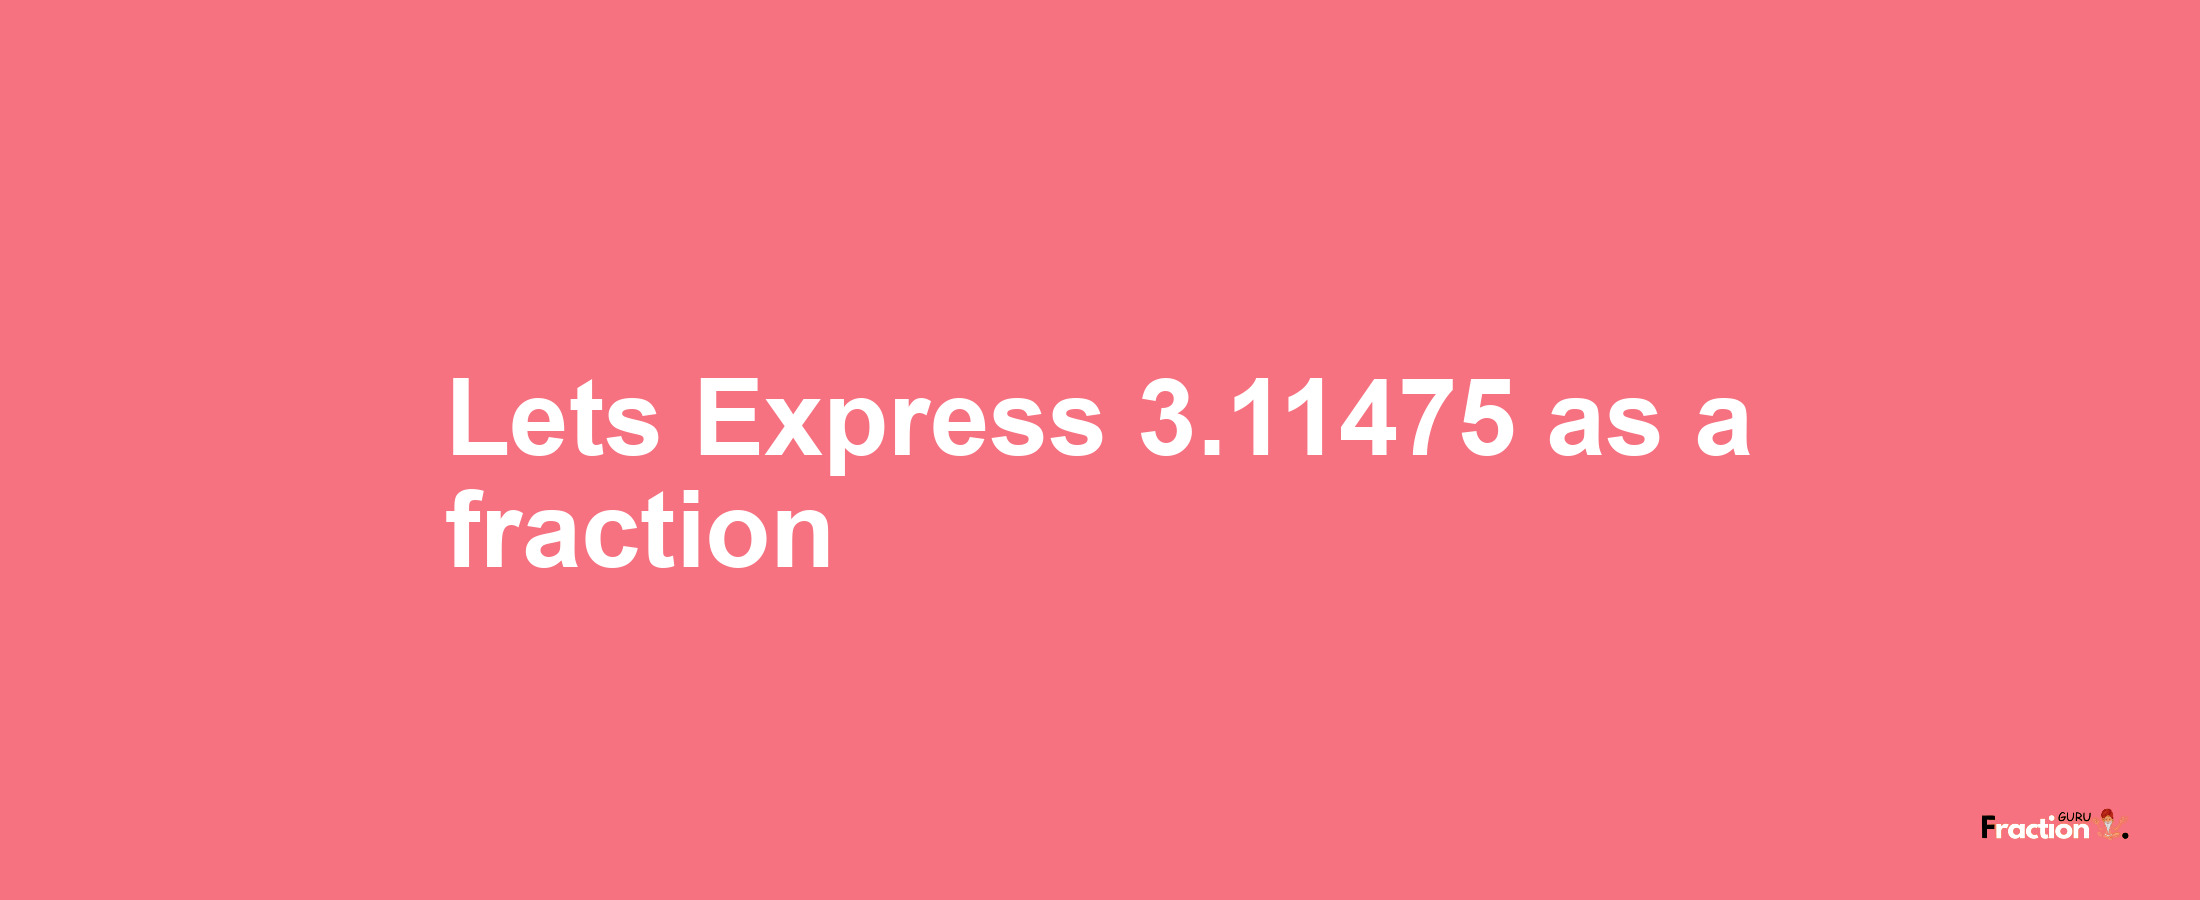 Lets Express 3.11475 as afraction